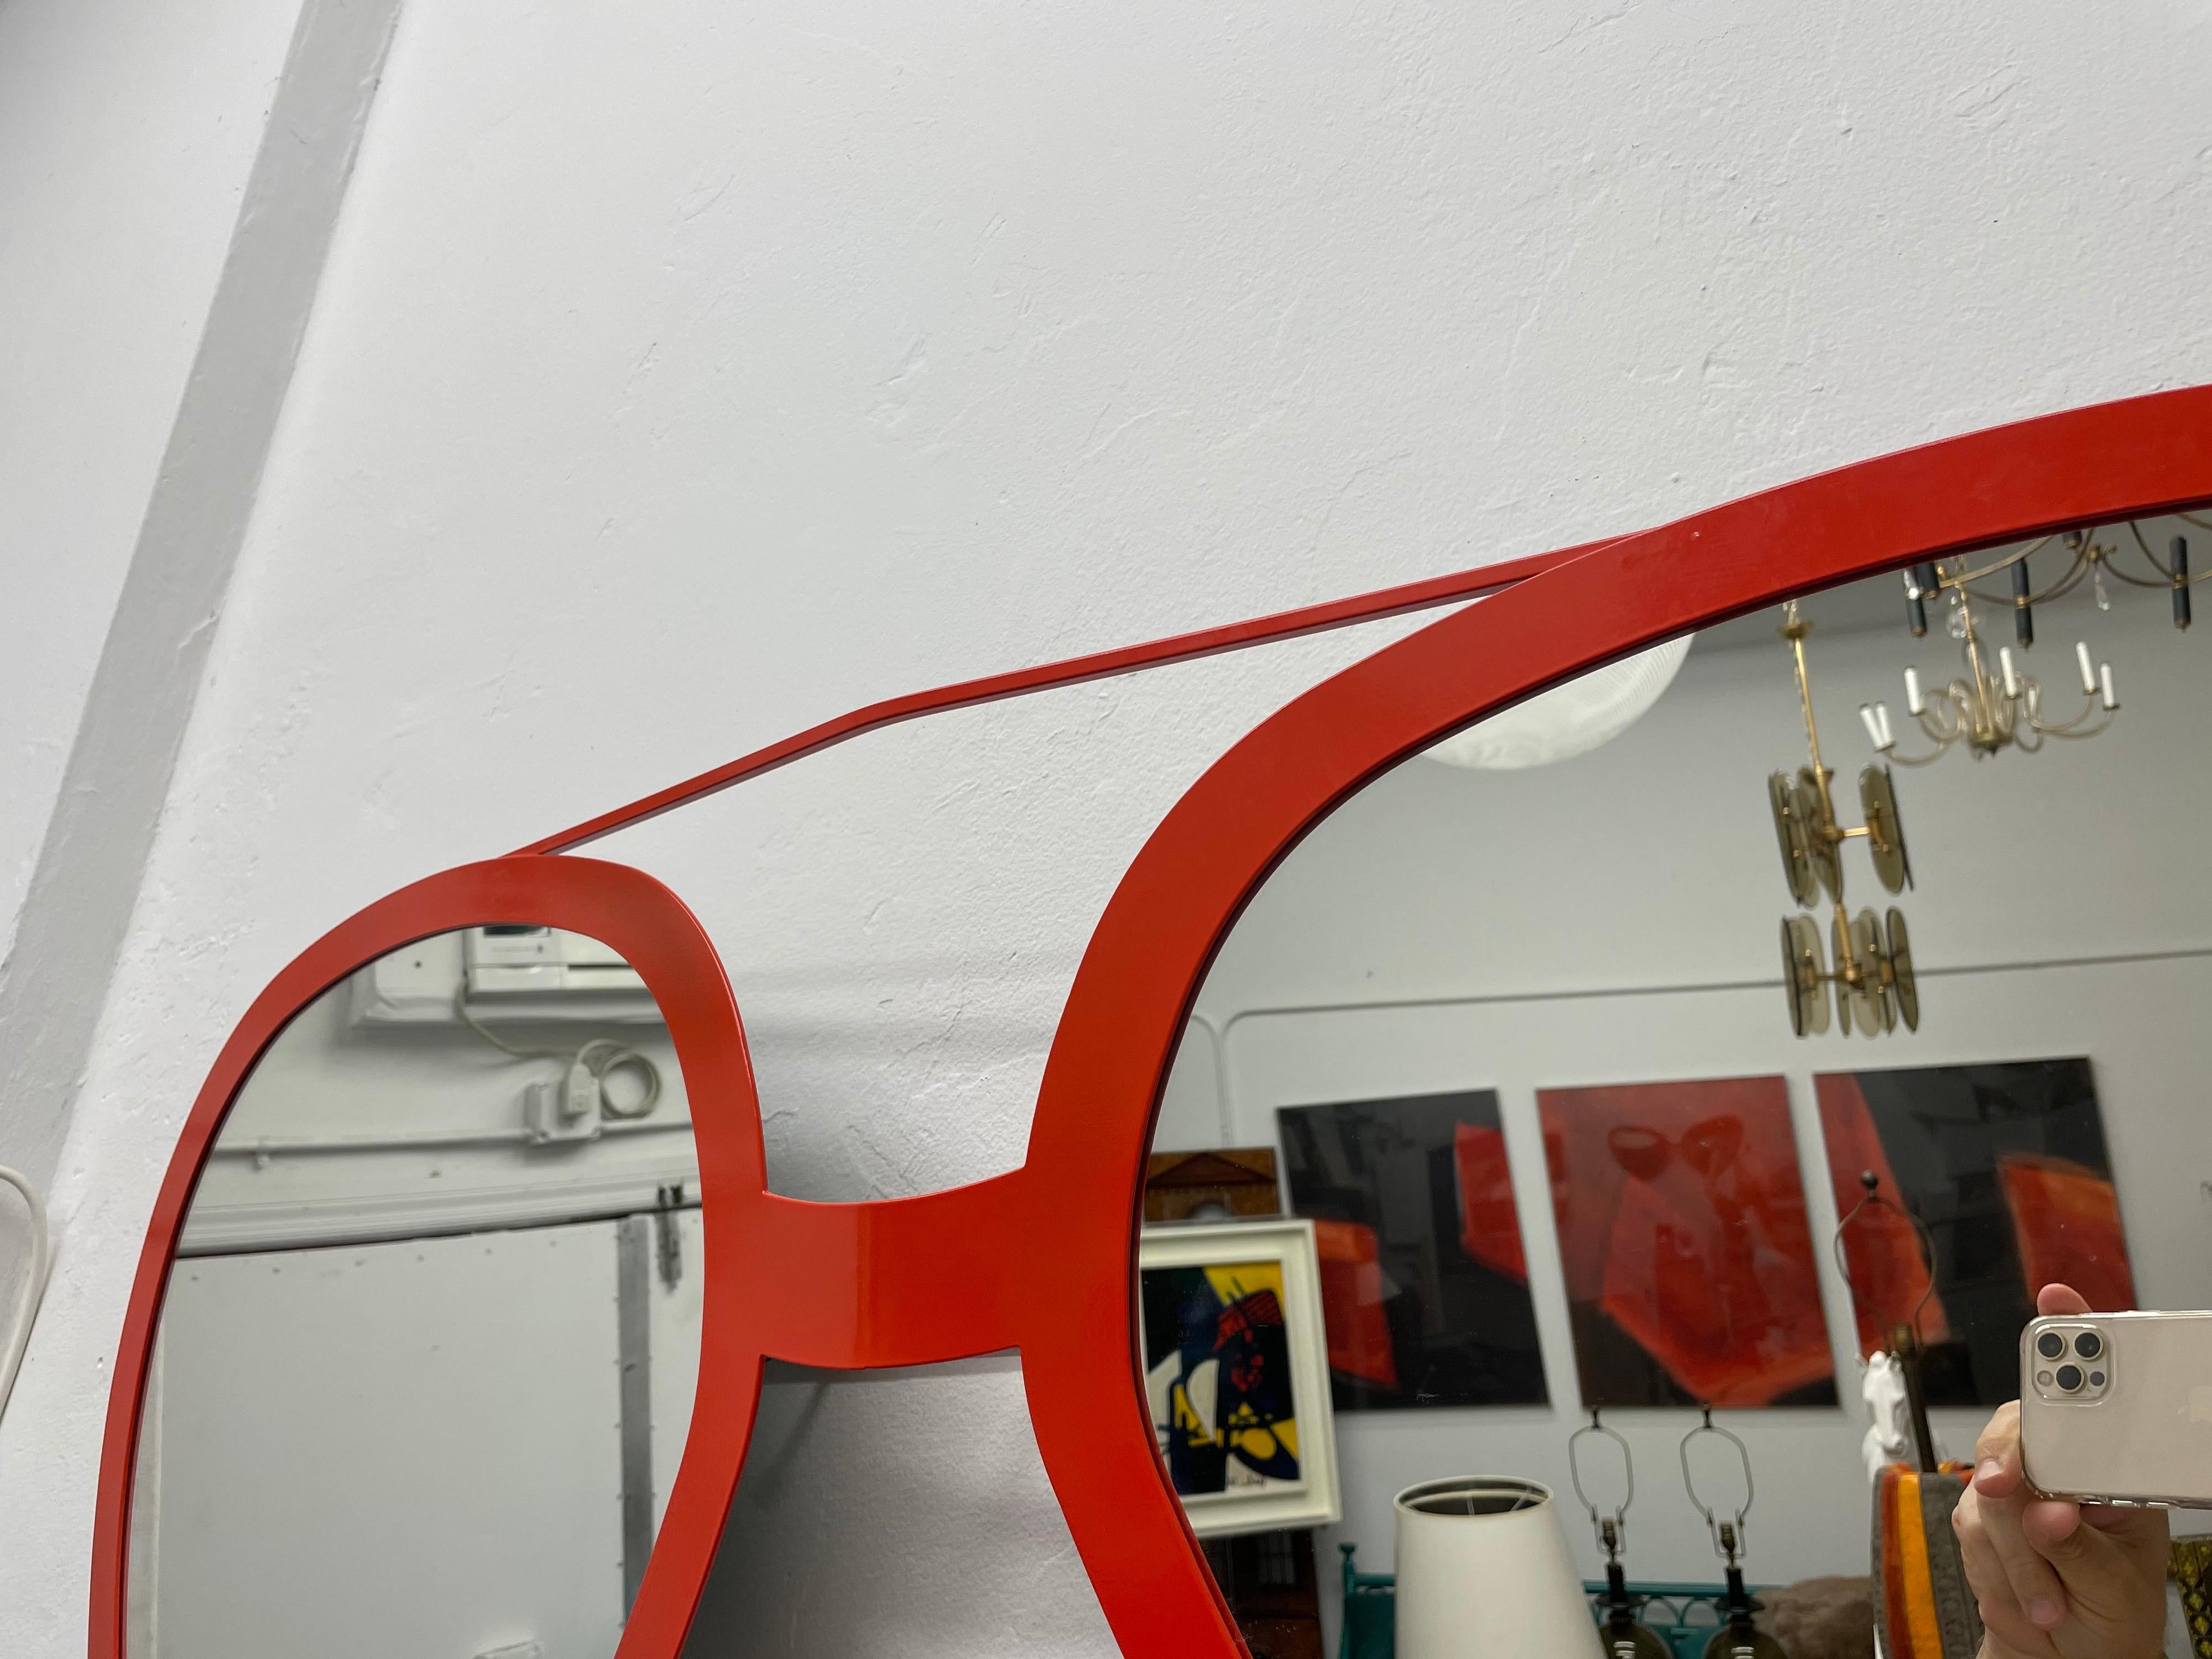 This is out of this world - so cool and fun in this vibrant orange powder-coated frame with mirror inserts makes for an awesome accent to a foyer, powder-room or kids room. The Aviator style sunglasses with mirror lenses are a perfect statement